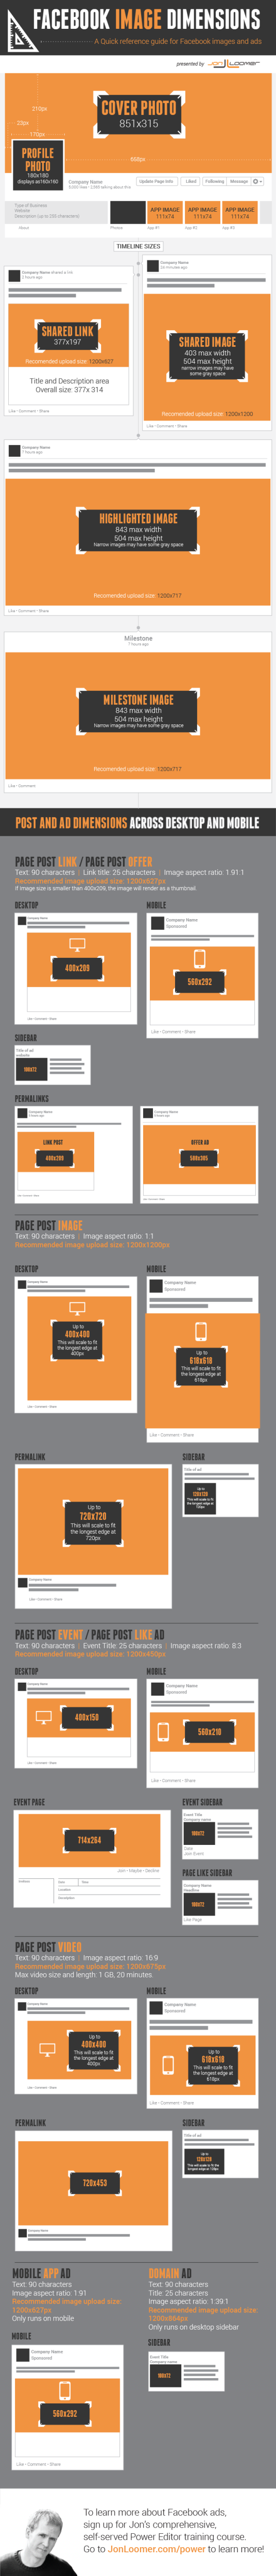 Facebook Image Dimensions [Infographic]